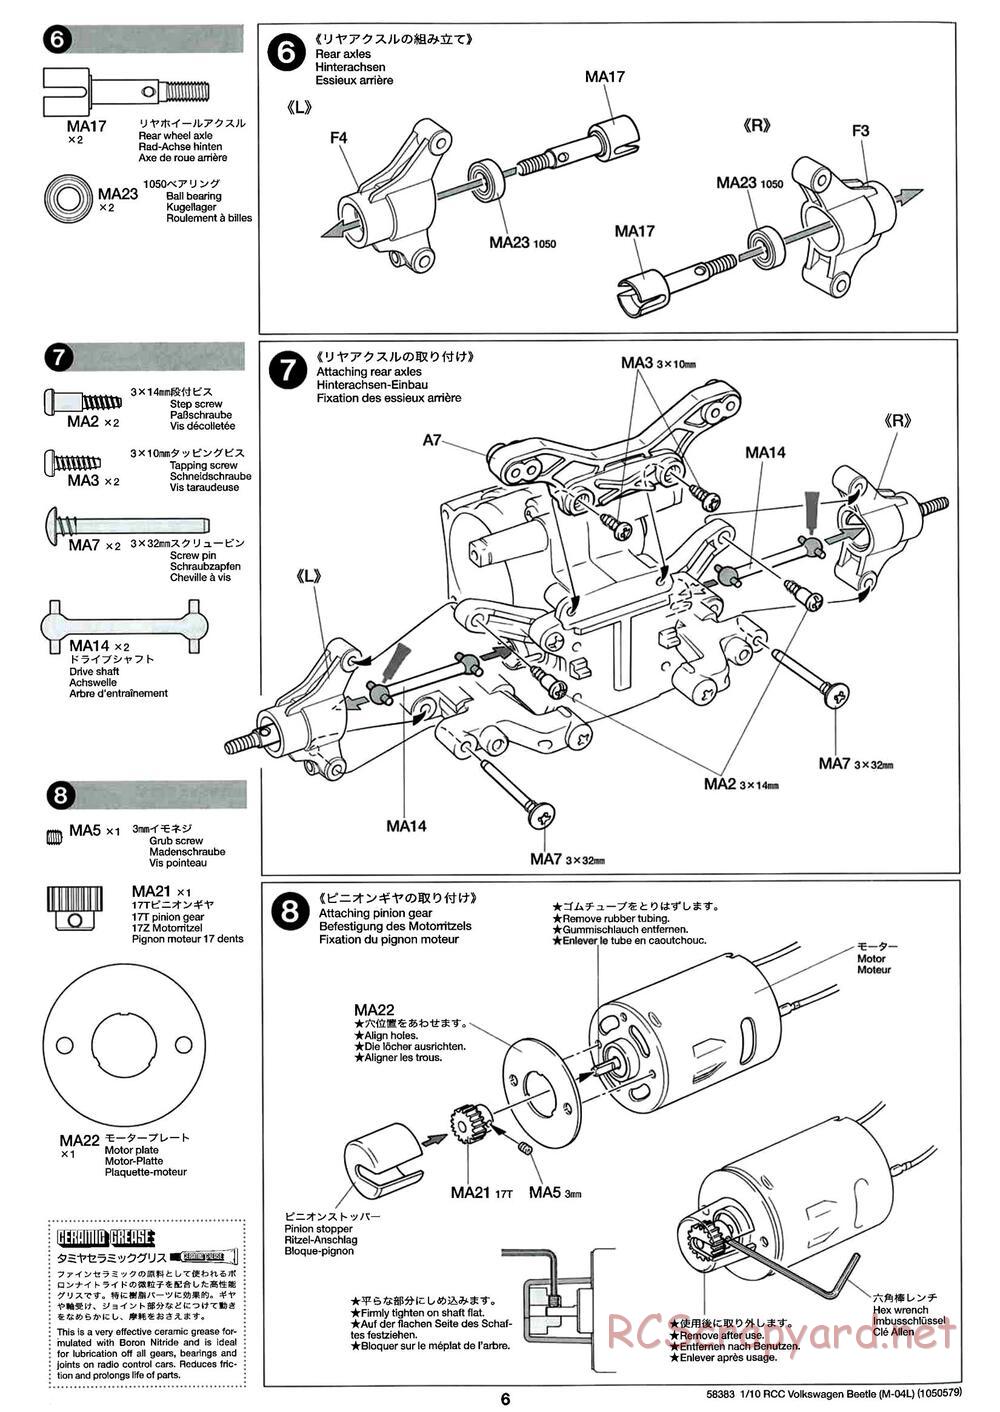 Tamiya - Volkswagen Beetle - M04L Chassis - Manual - Page 6